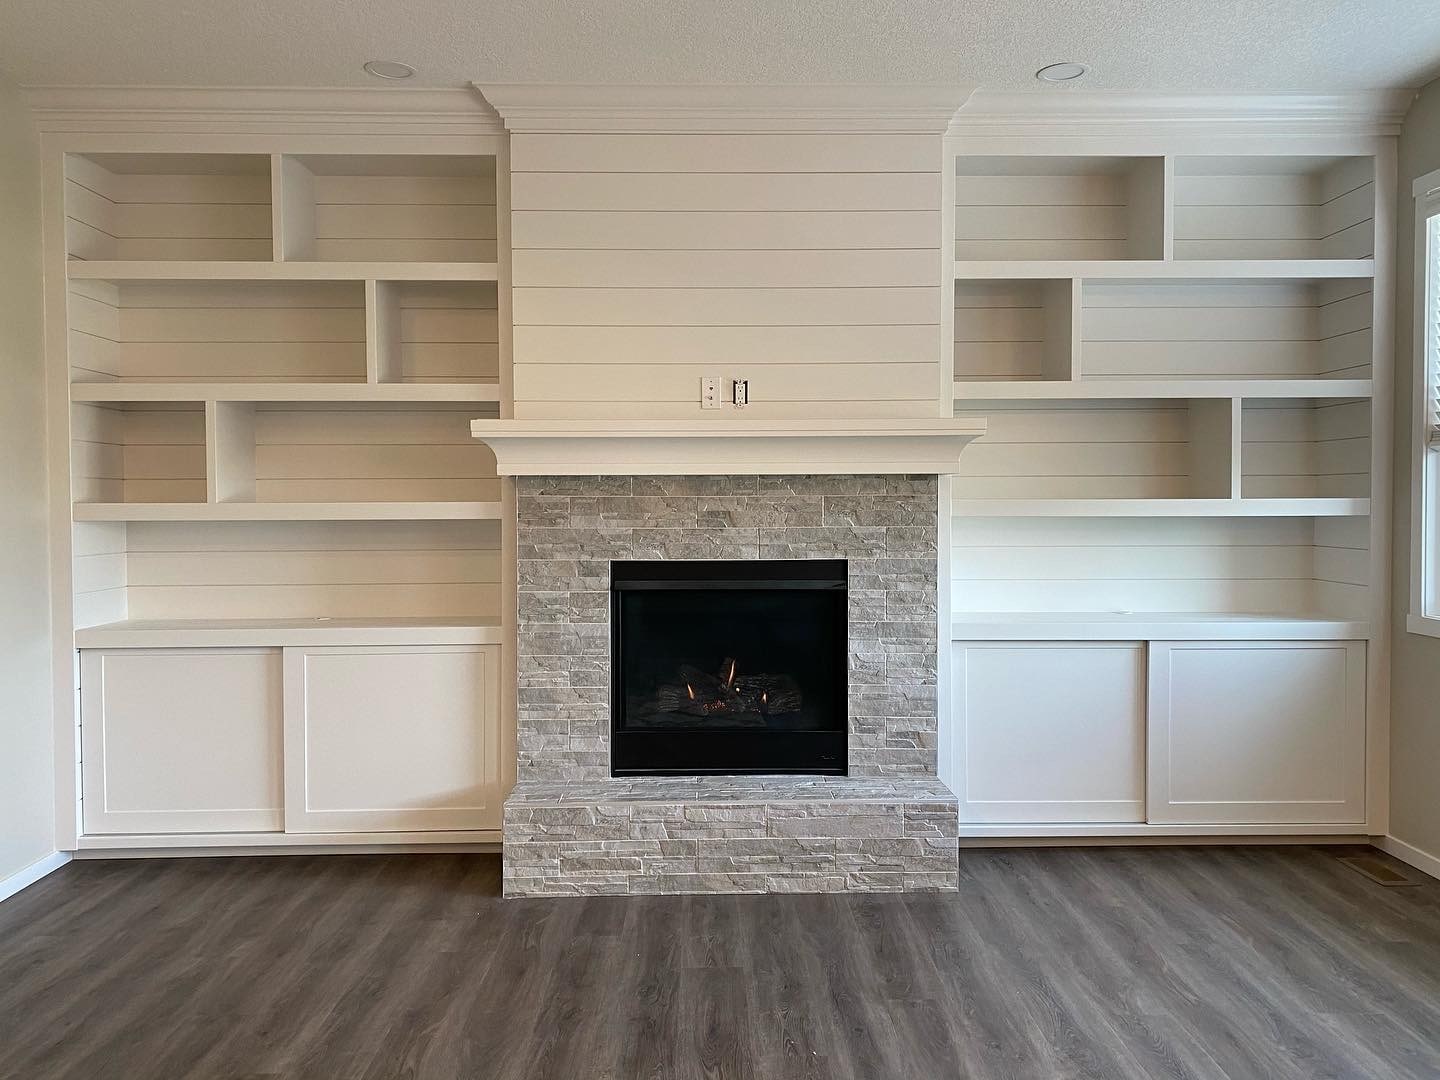 Built-in shelving unit with concealed sliding cabinet doors on the bottom. 